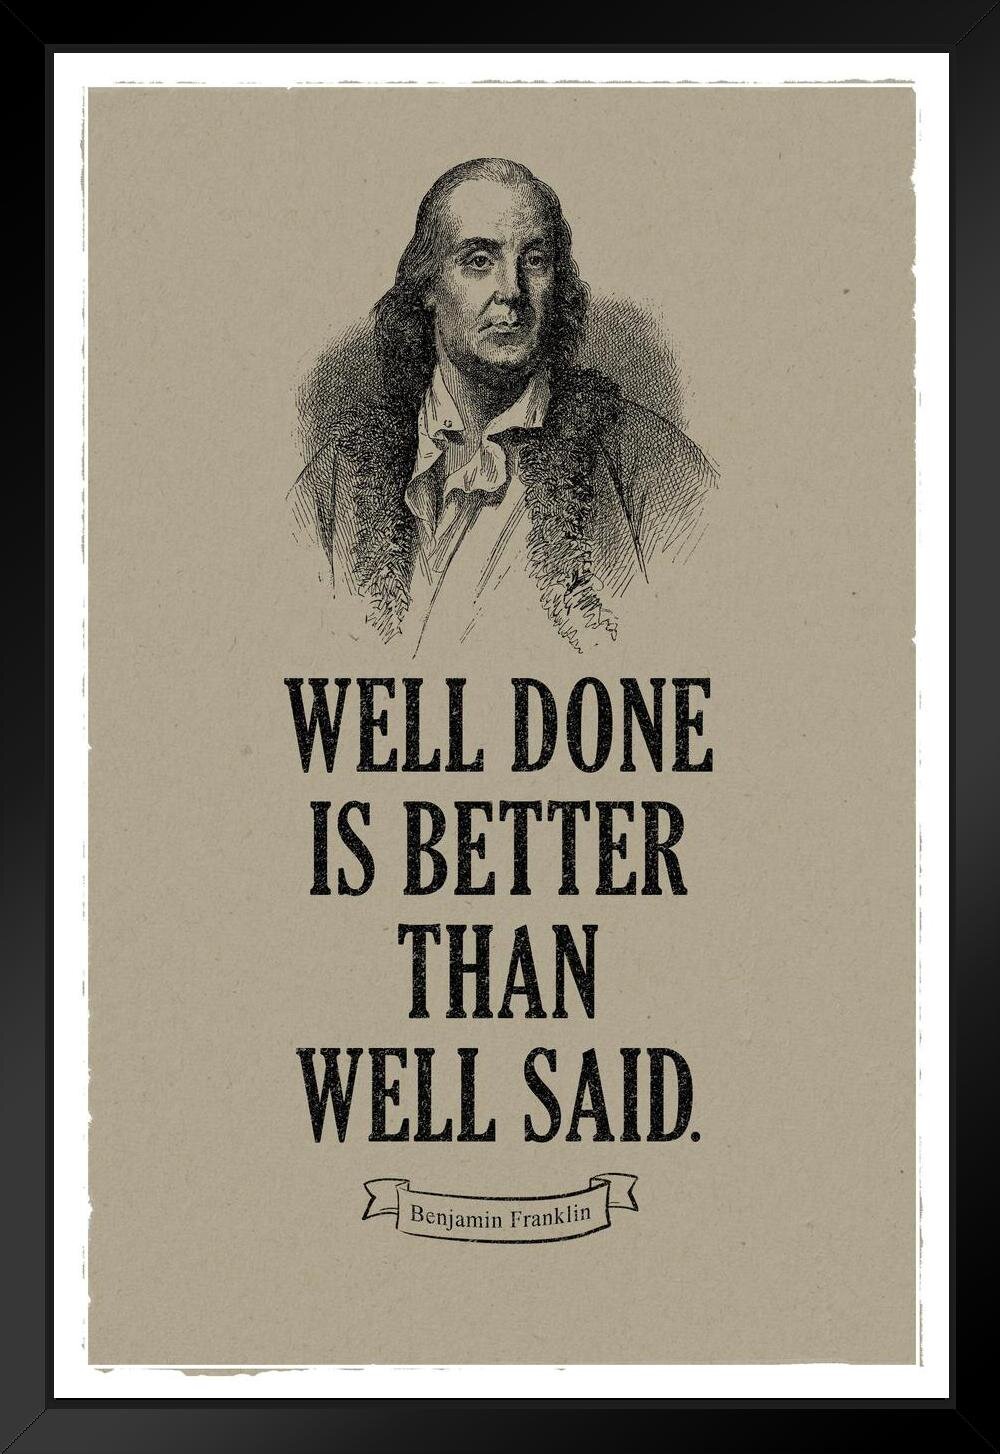 Ben Franklin He that is good making Excuses NEW Motivational Classroom POSTER 